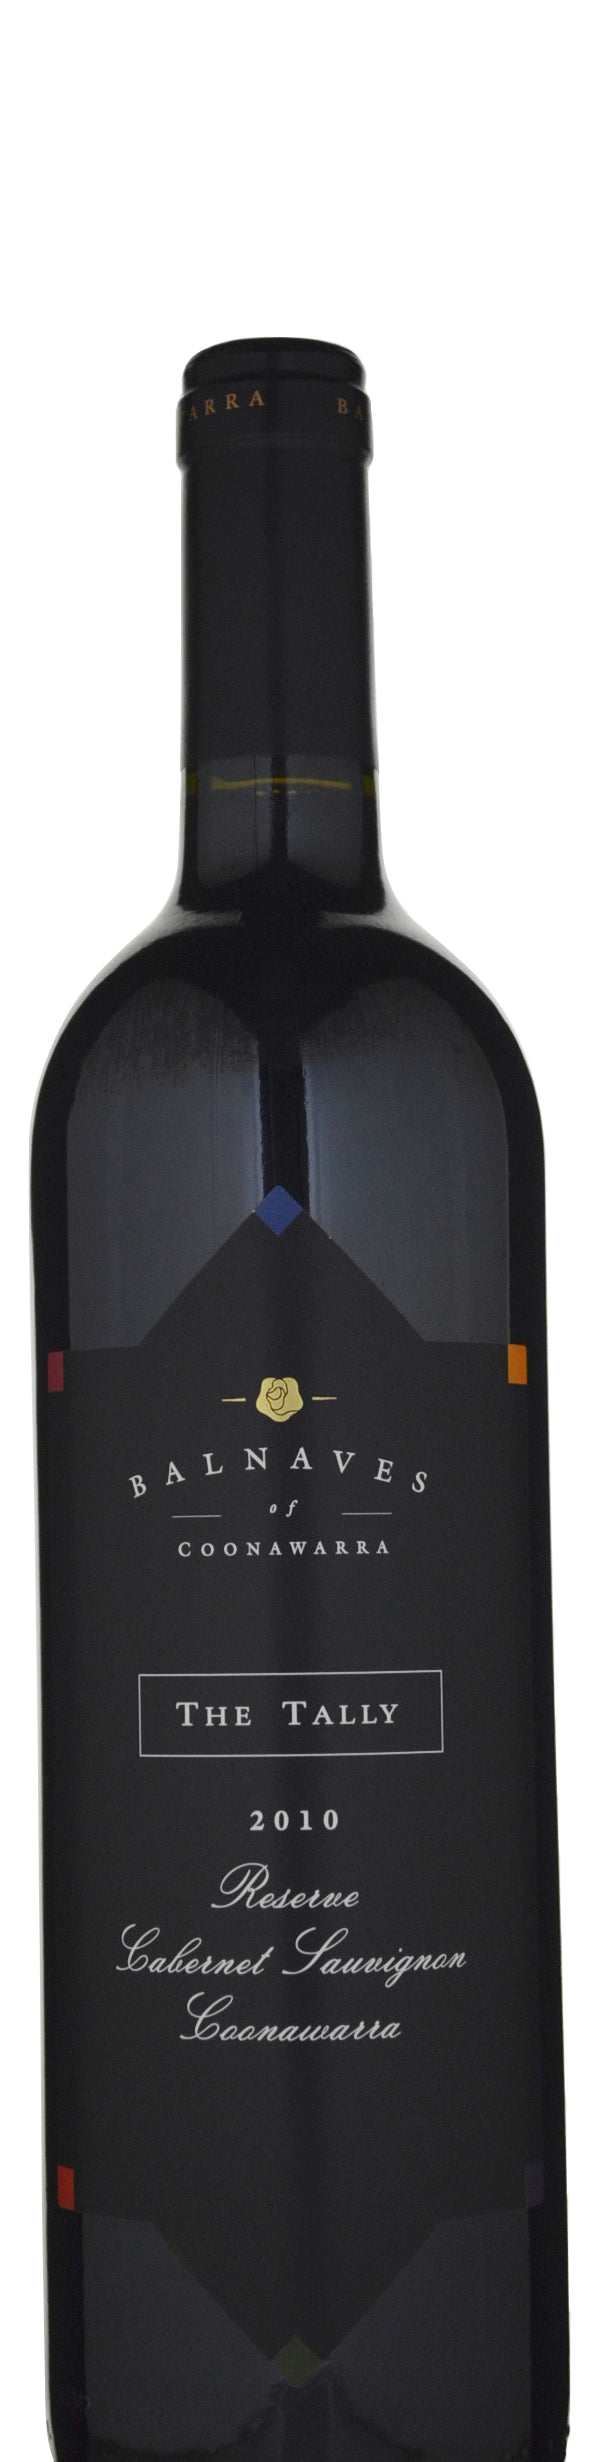 Balnaves of Coonawarra The Tally Reserve Cabernet Sauvignon 2010